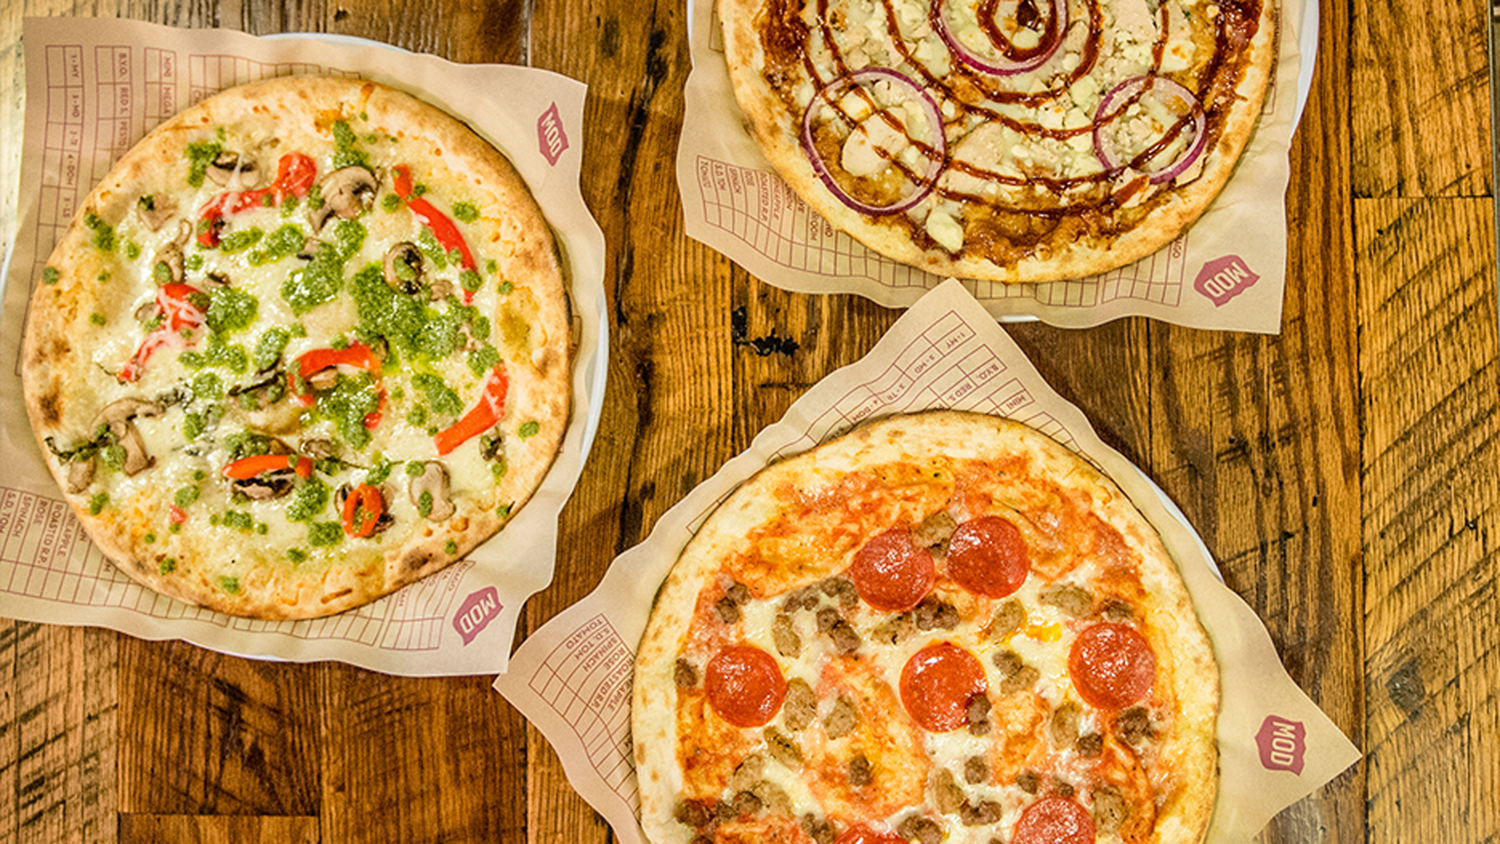 MOD Pizza Opens First Florida Location in the City of Parkland 3